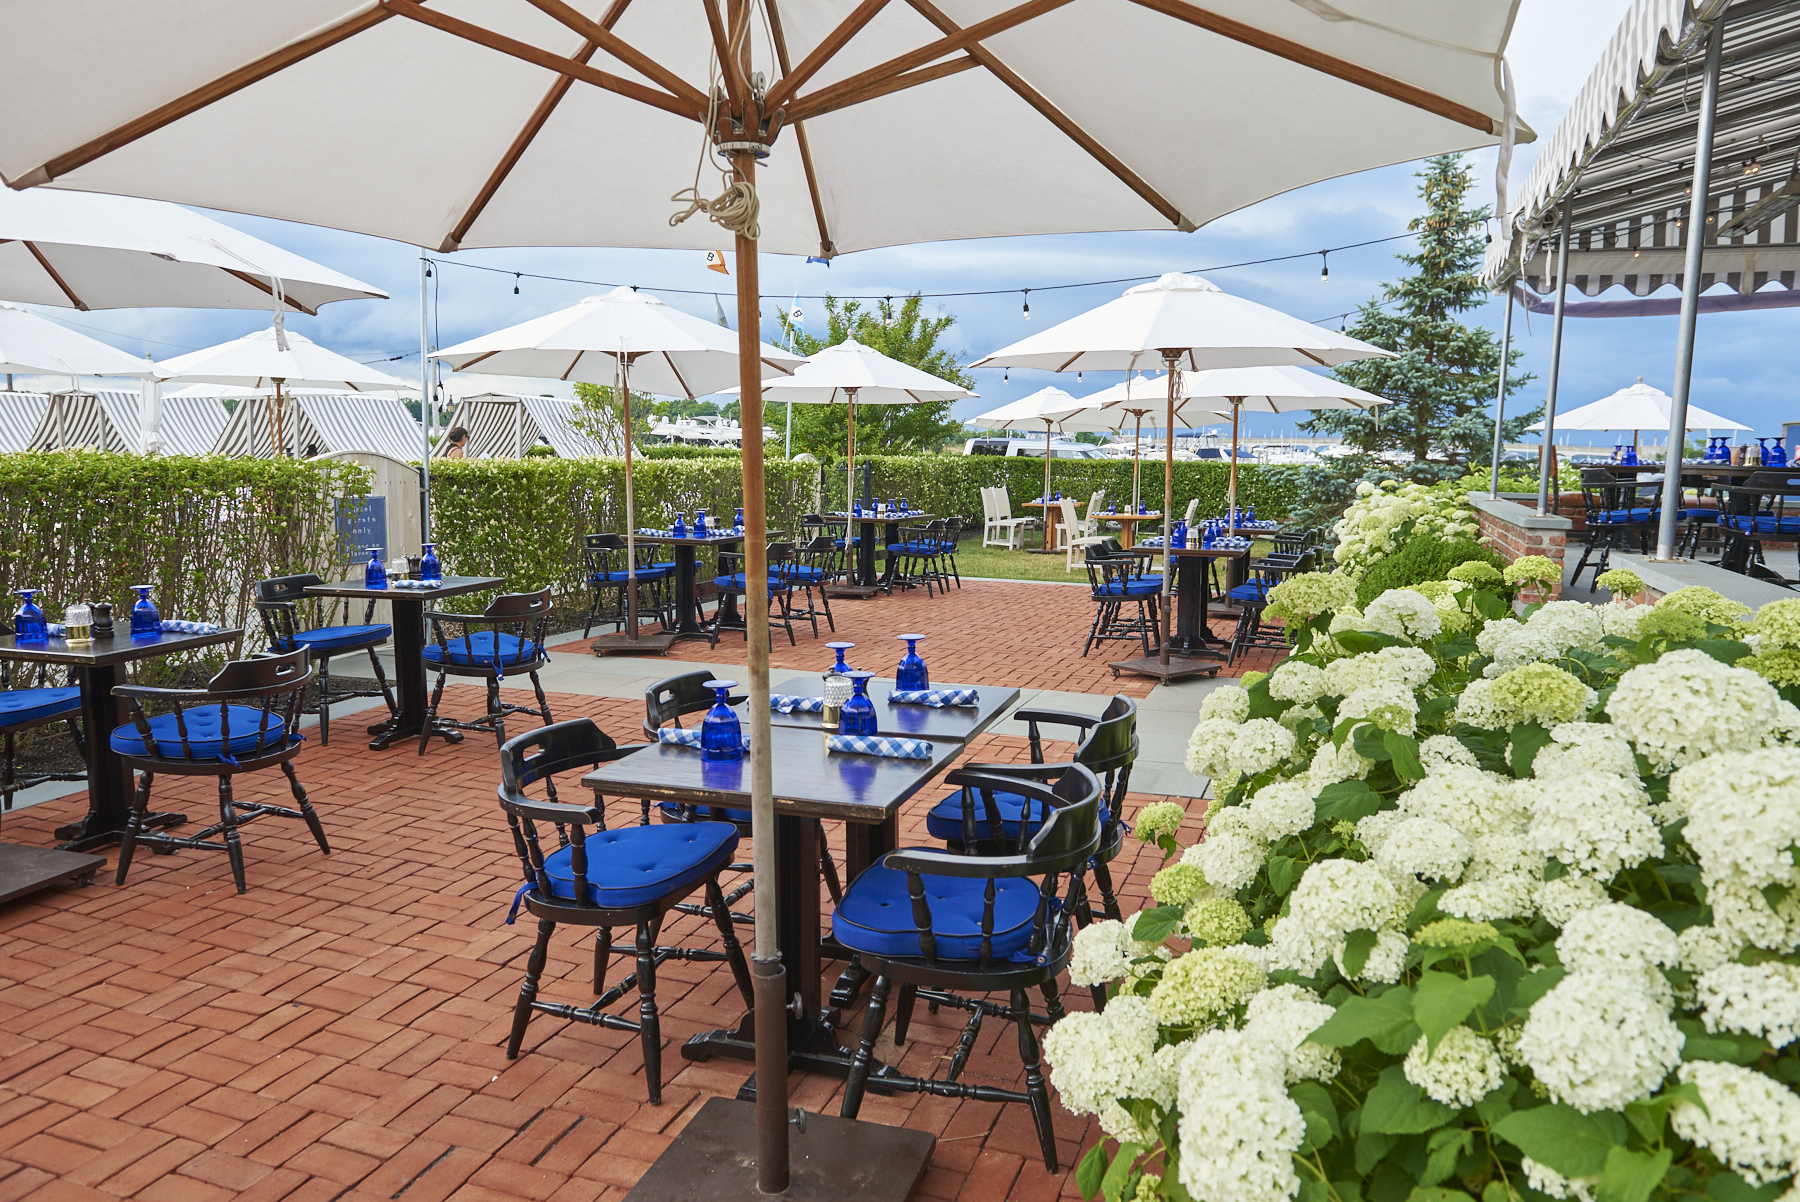 Outdoor dining at Baron's Cove.